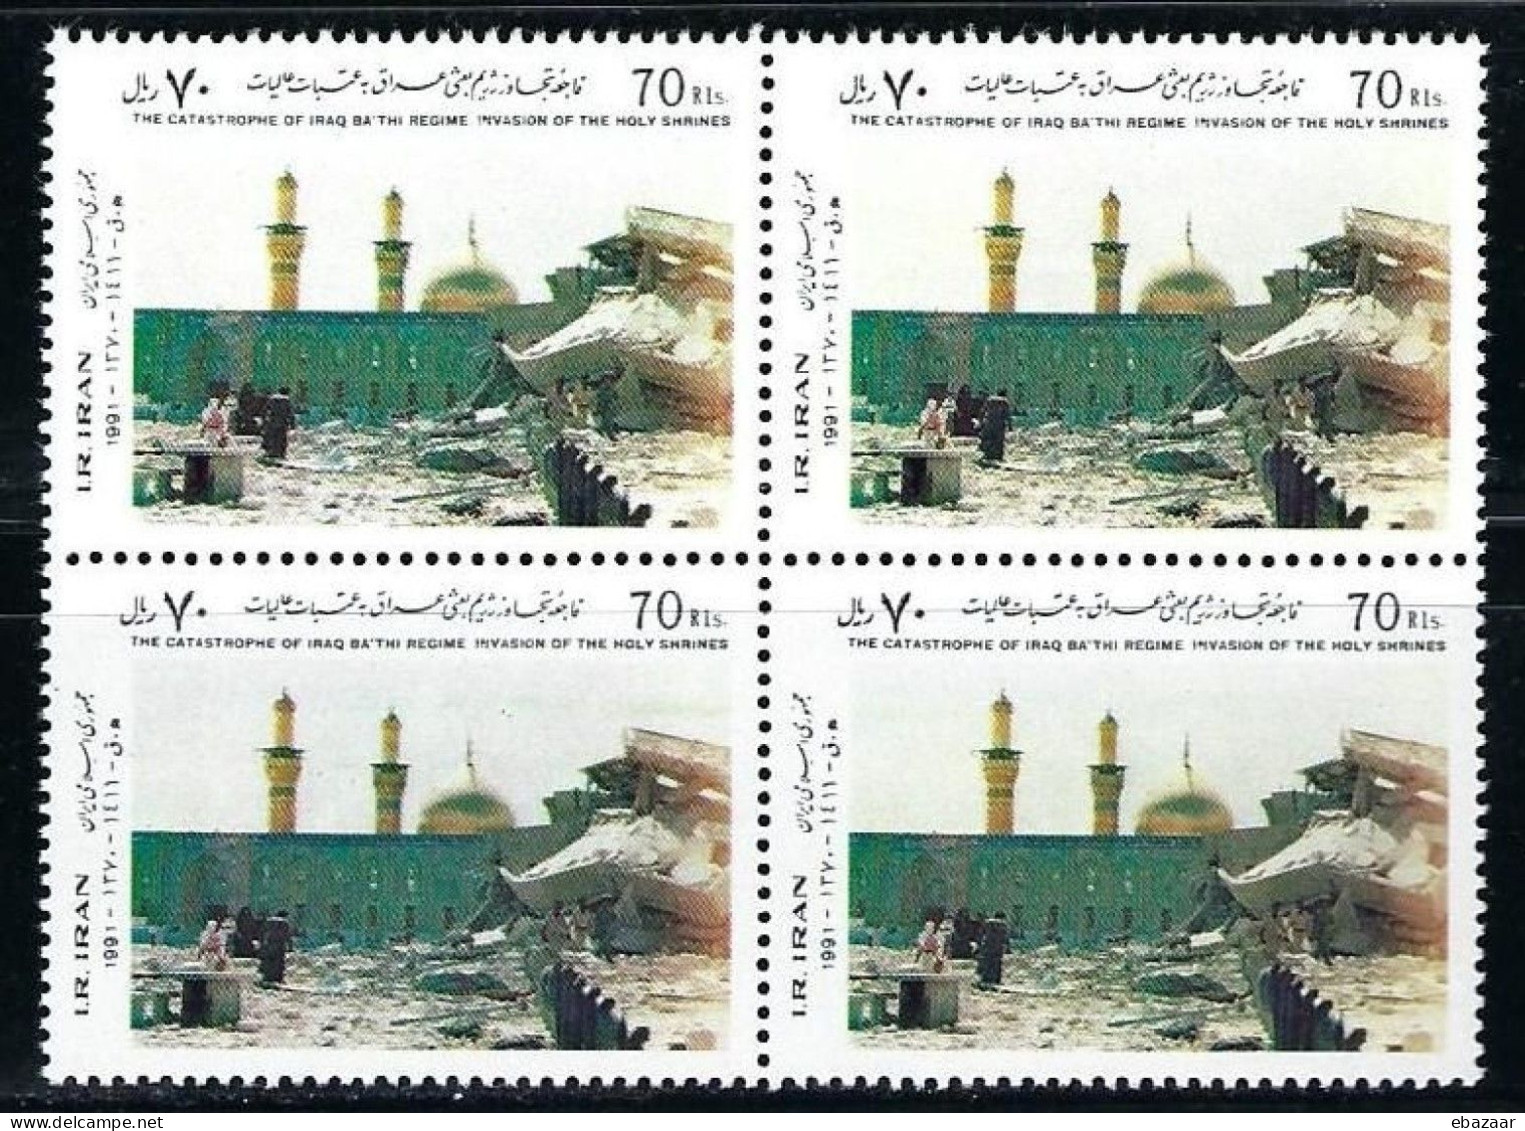 Iran 1991 - Attack Of The Iraqi Army On The Holy Shrines - Karbala Stamps Block Of 4 MNH - Islam